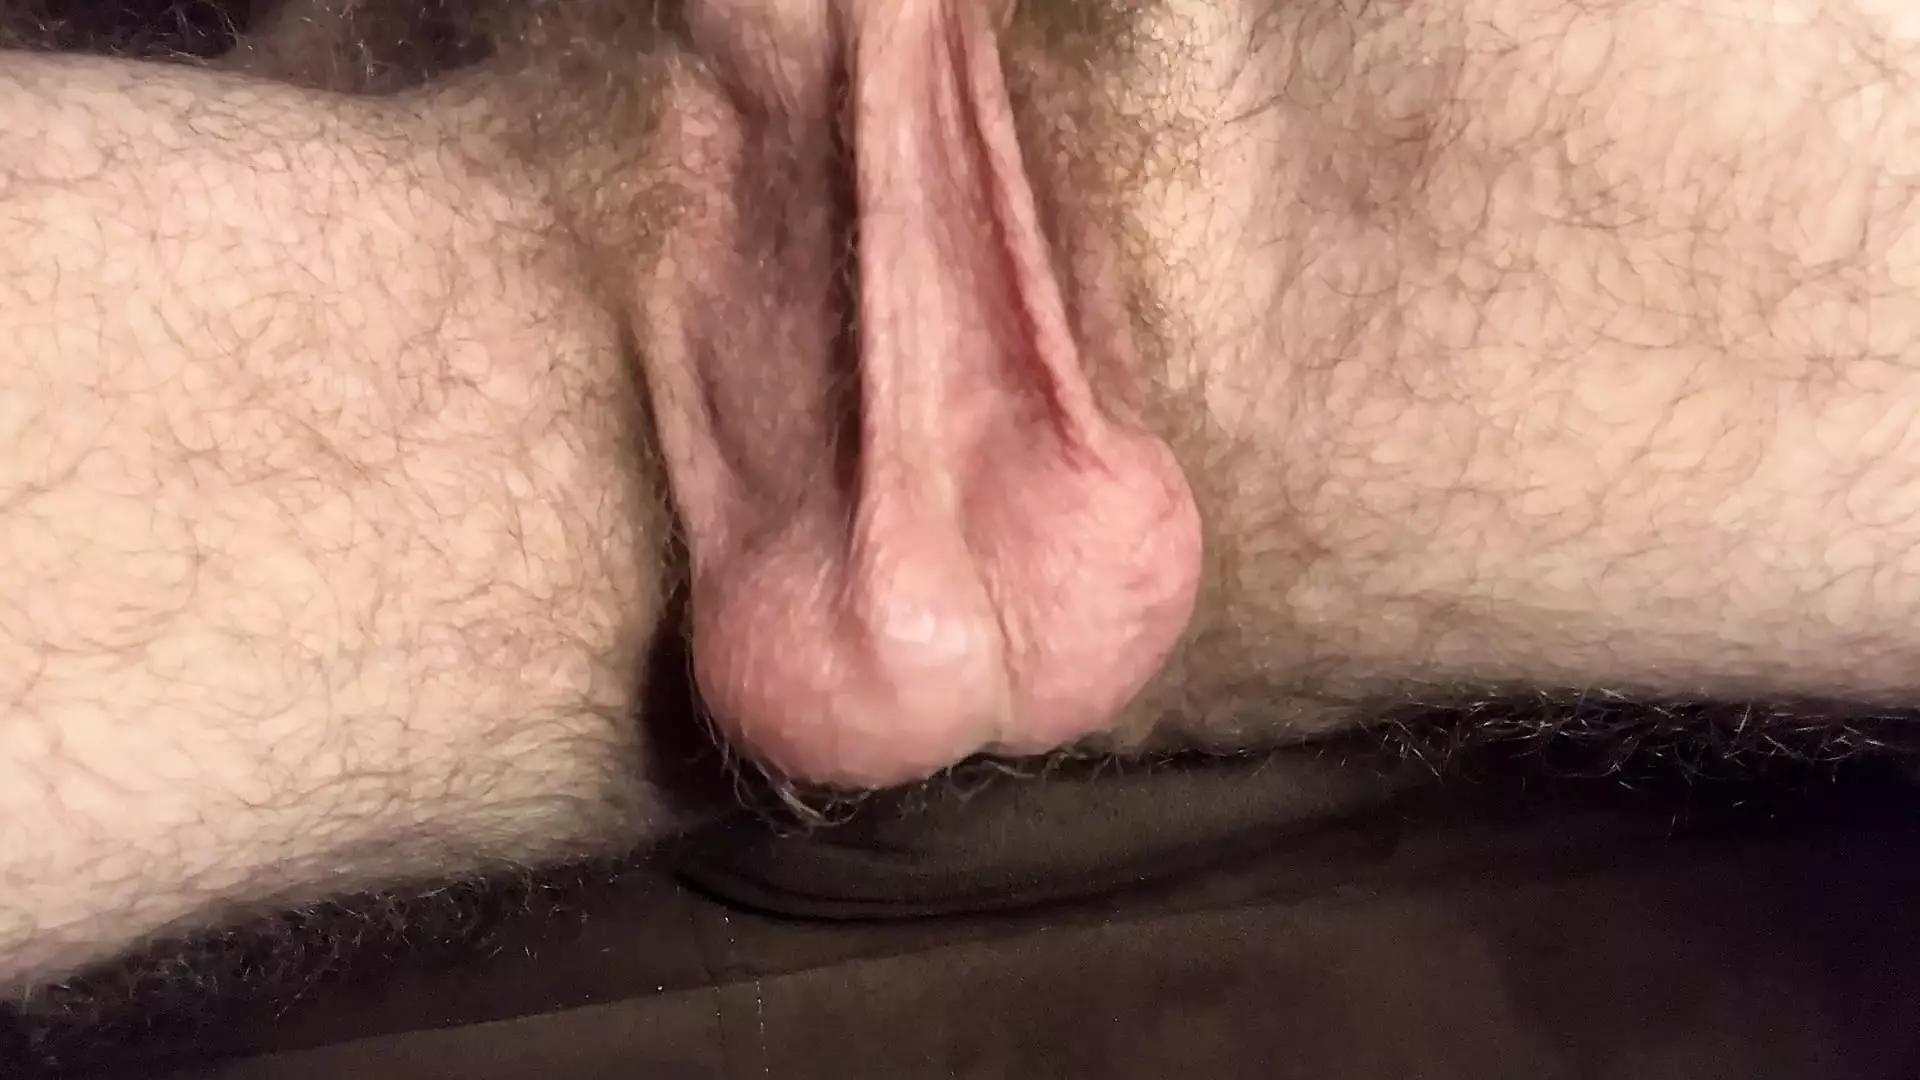 Showing off My very Hairy Dick Balls Scrotum and Foreskin on a Hot Day xHamster